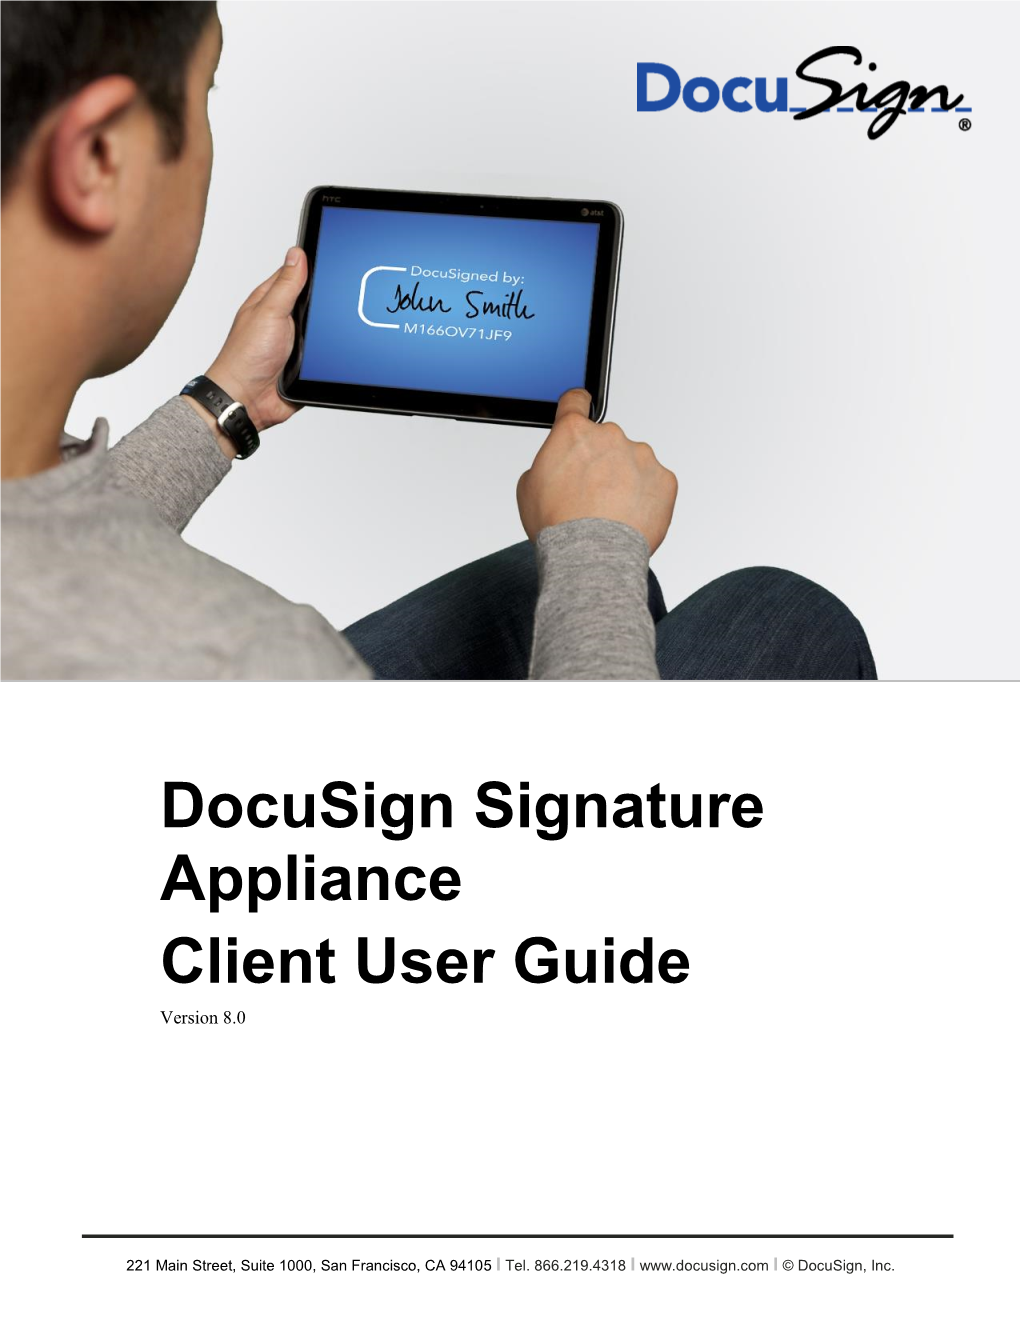 Docusign Signature Appliance Client User Guide Version 8.0